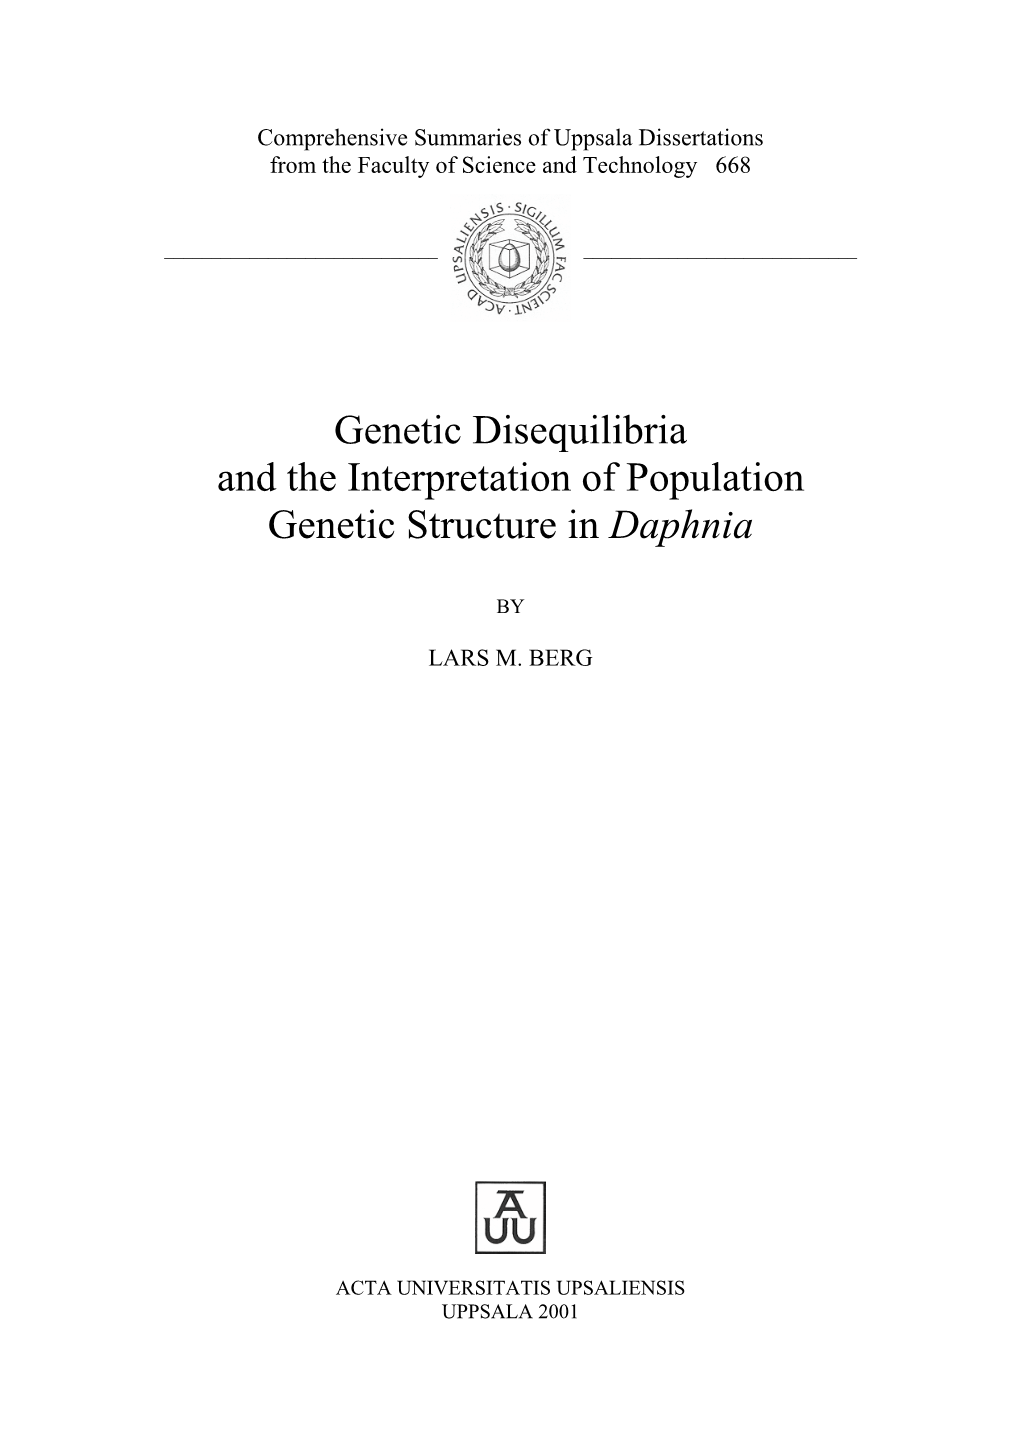 Genetic Disequilibria and the Interpretation of Population Genetic Structure in Daphnia